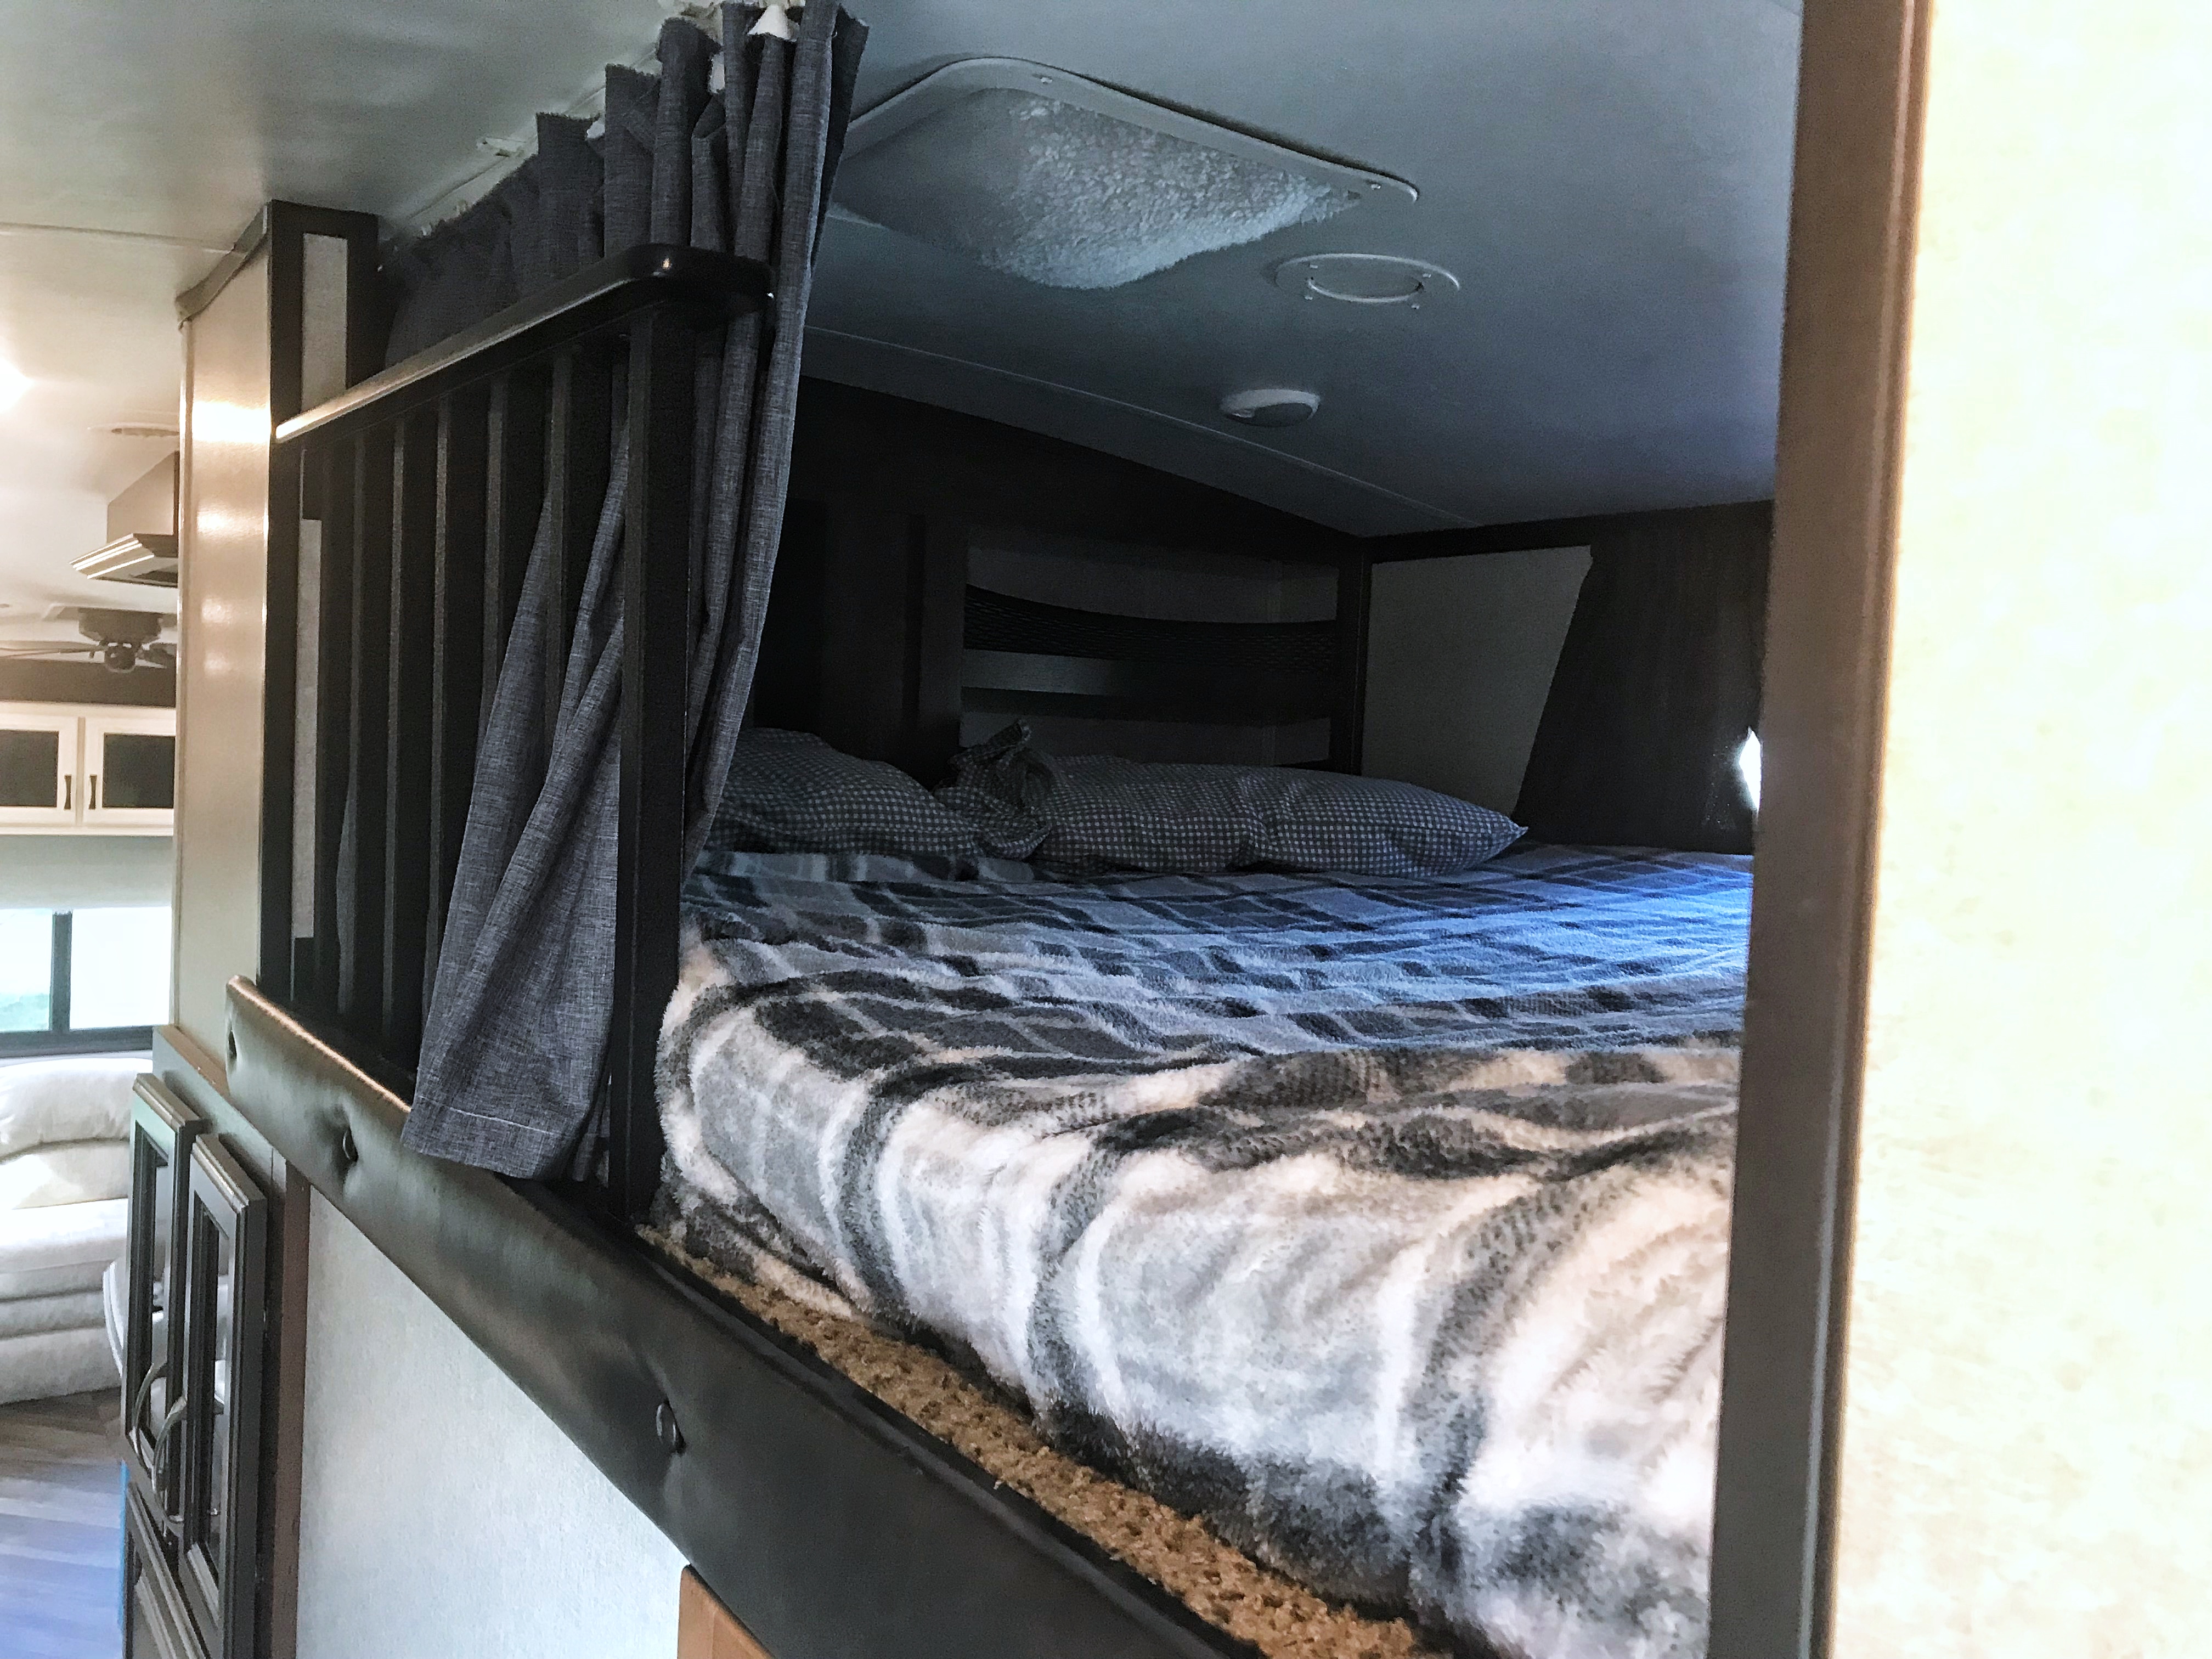 Our Jayco Rv Is For Jill Krause, Used Rv With Bunk Beds